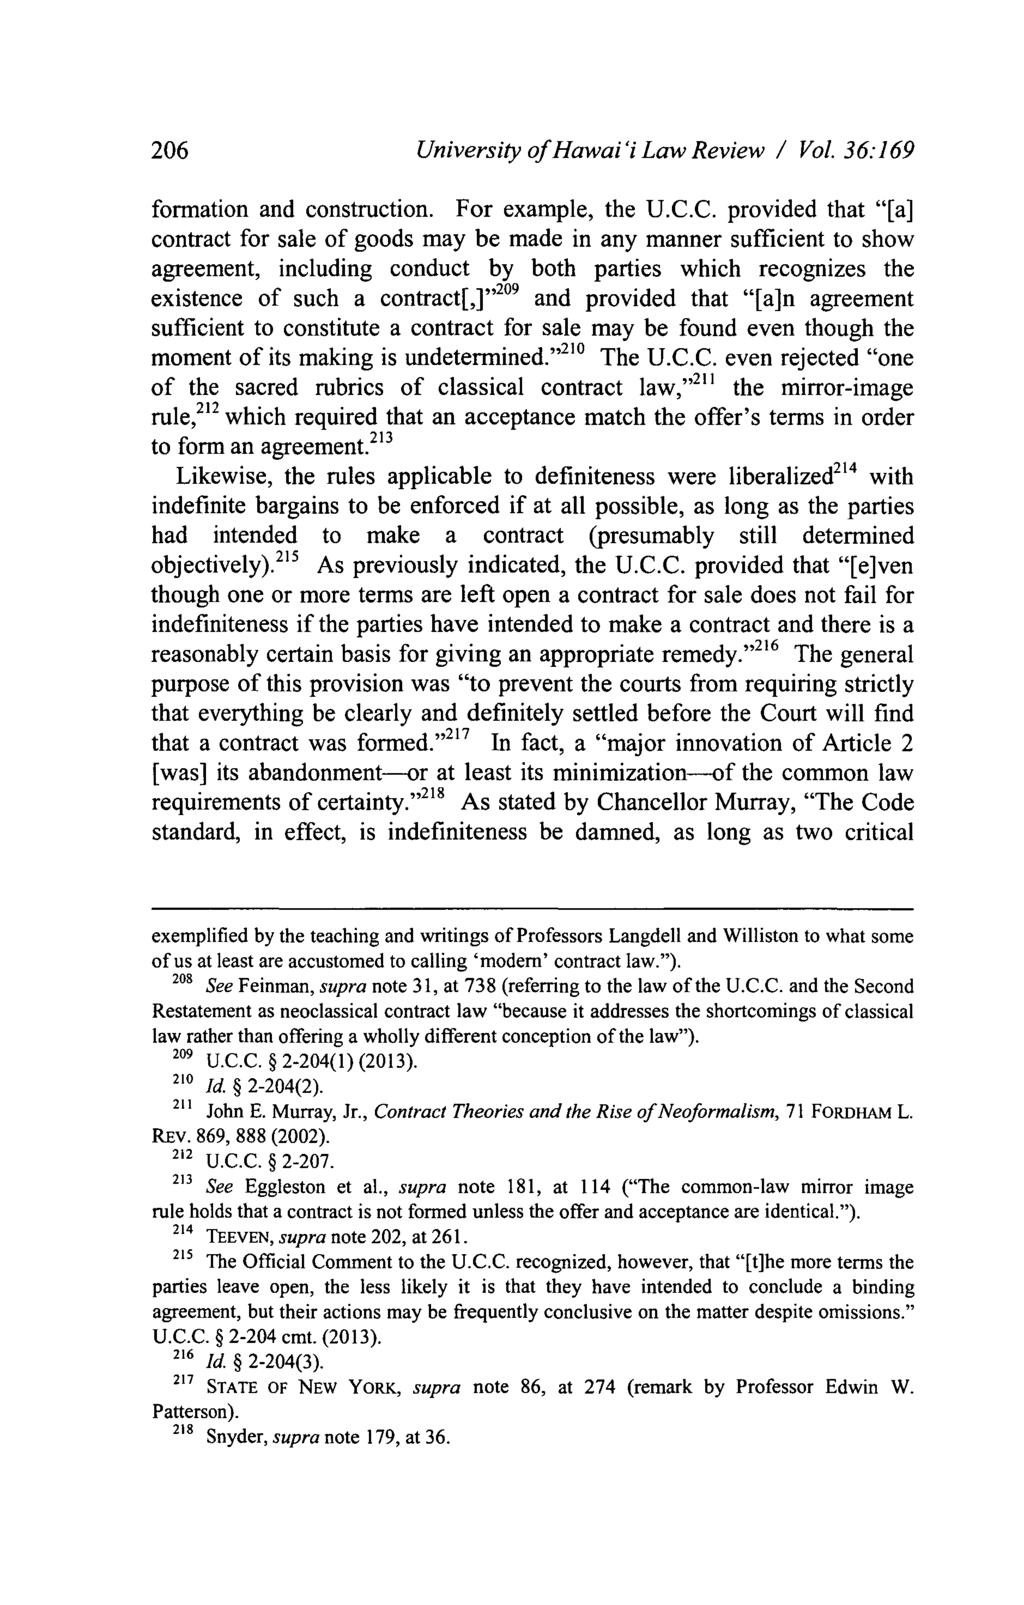 206 University of Hawai'i Law Review I Vol. 36:169 formation and construction. For example, the U.C.